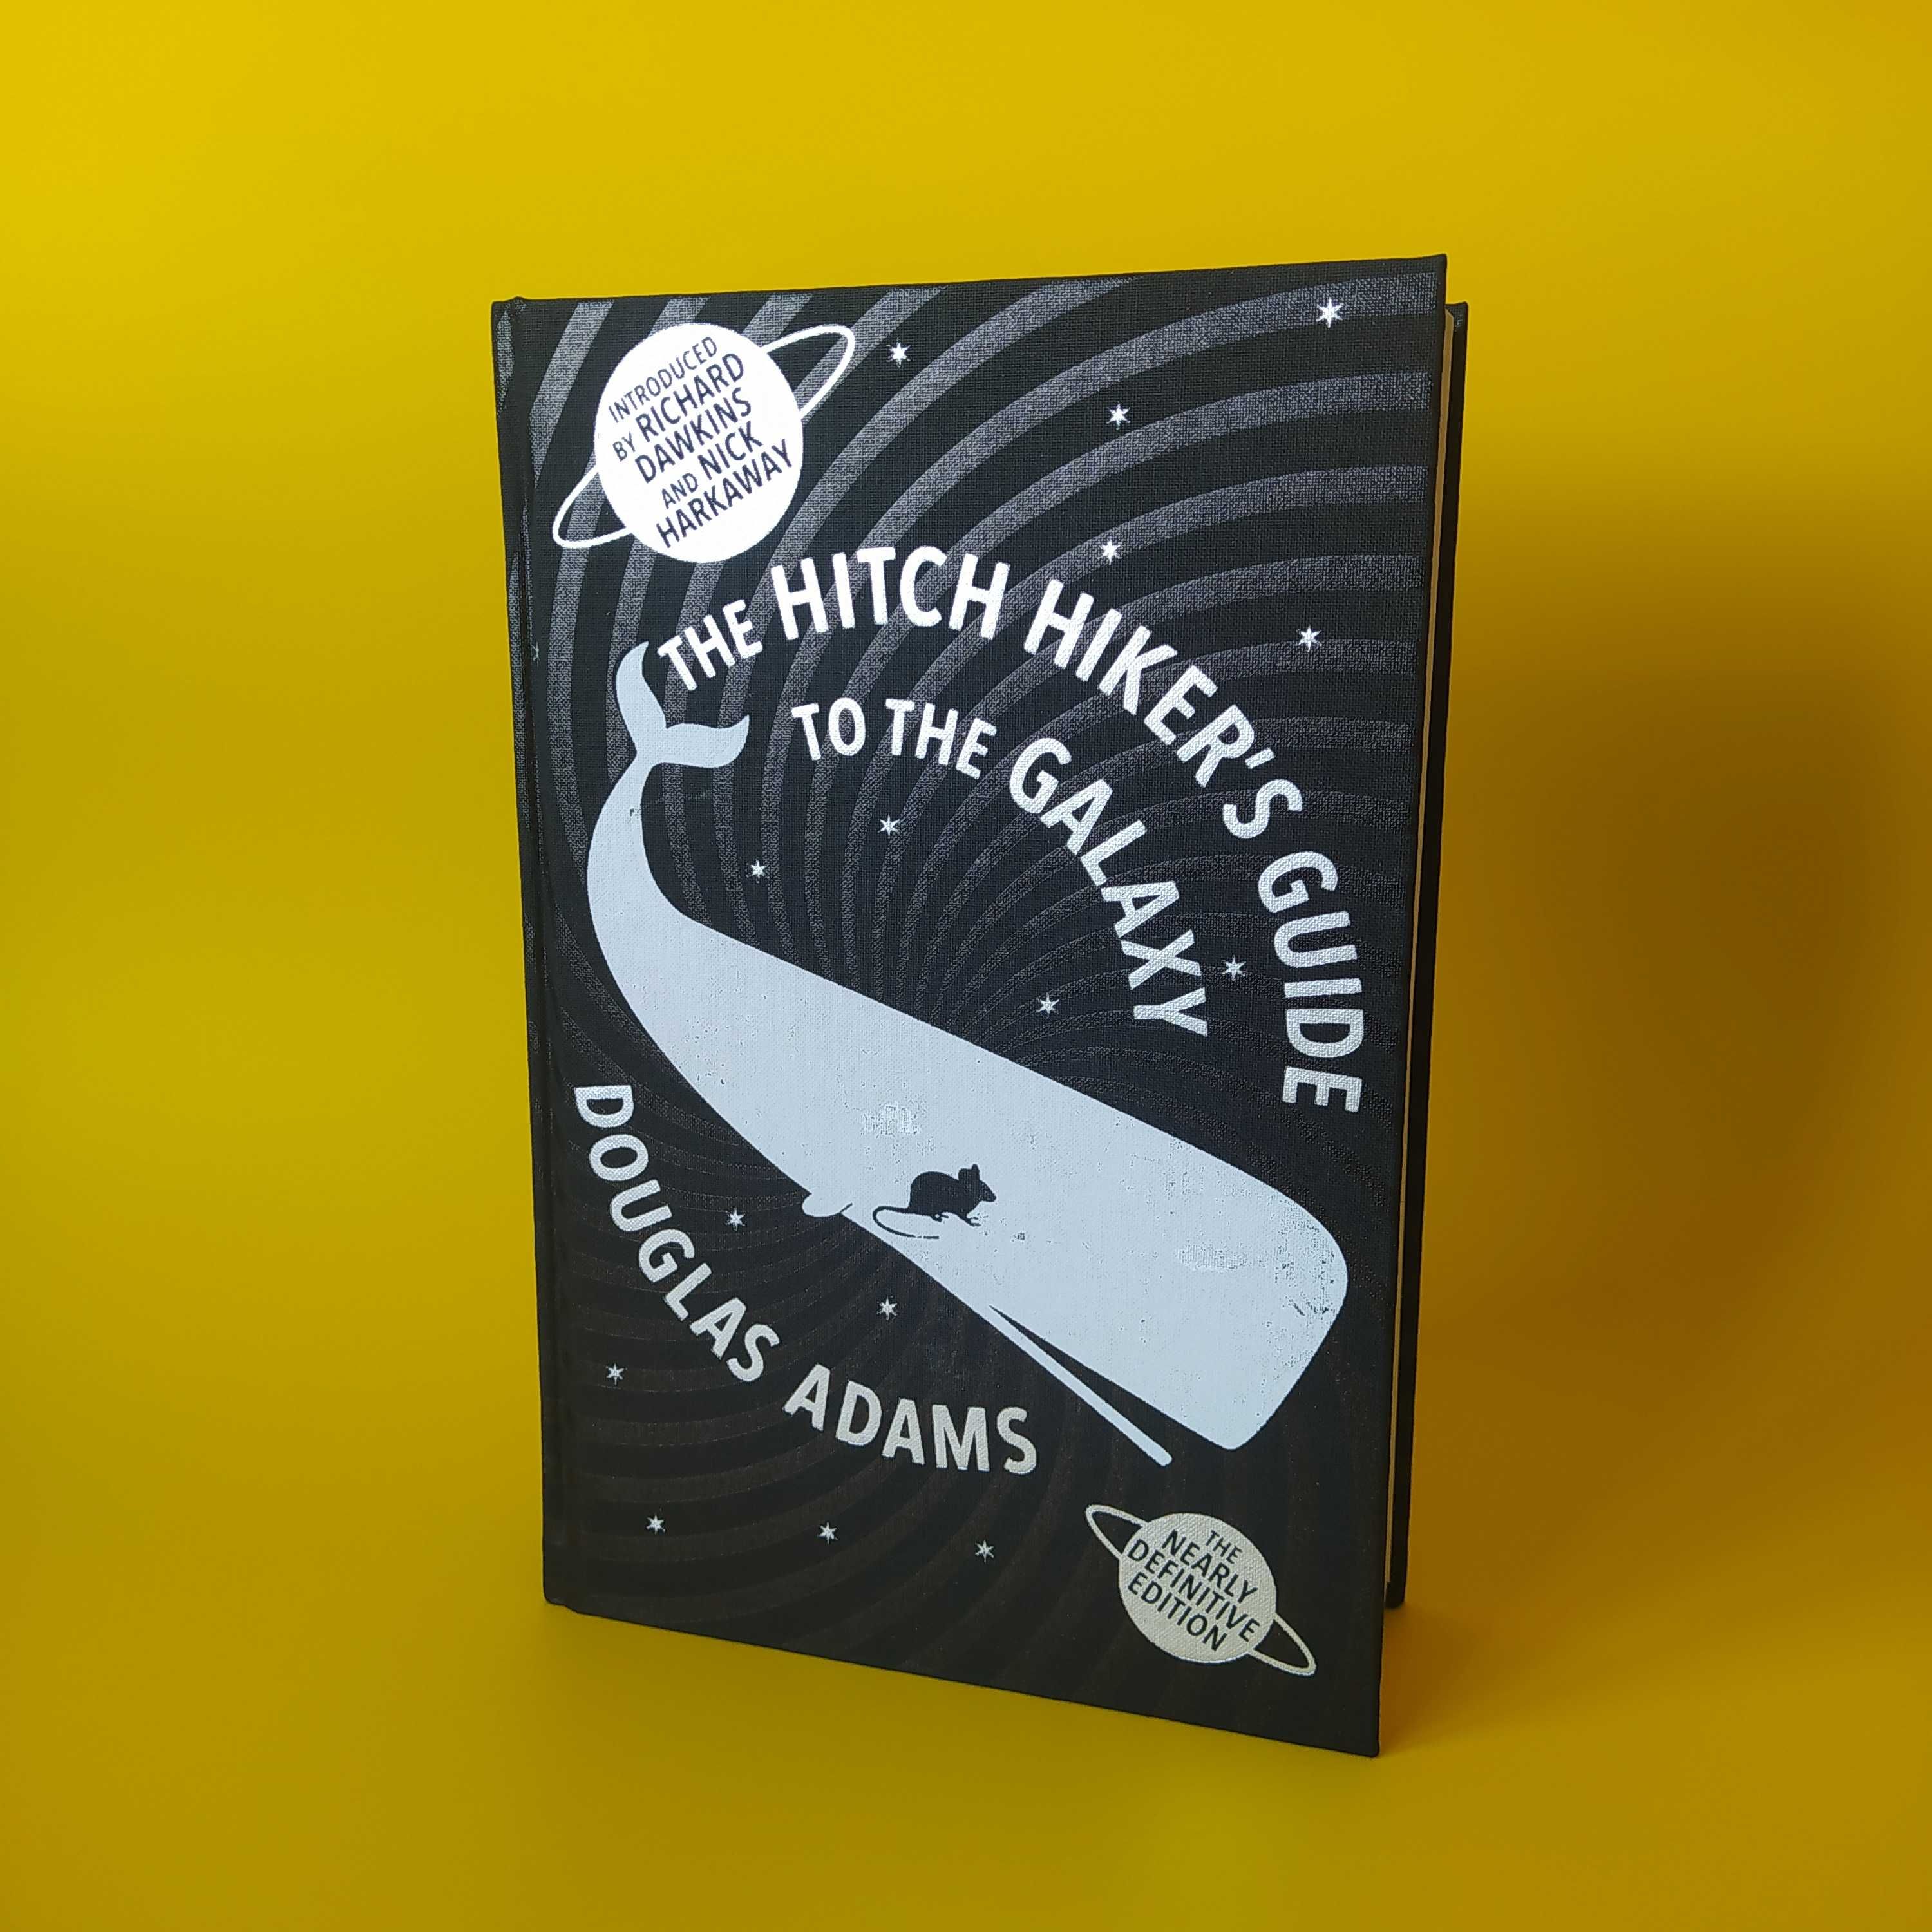 Livro The Hitch Hiker's Guide To The Galaxy